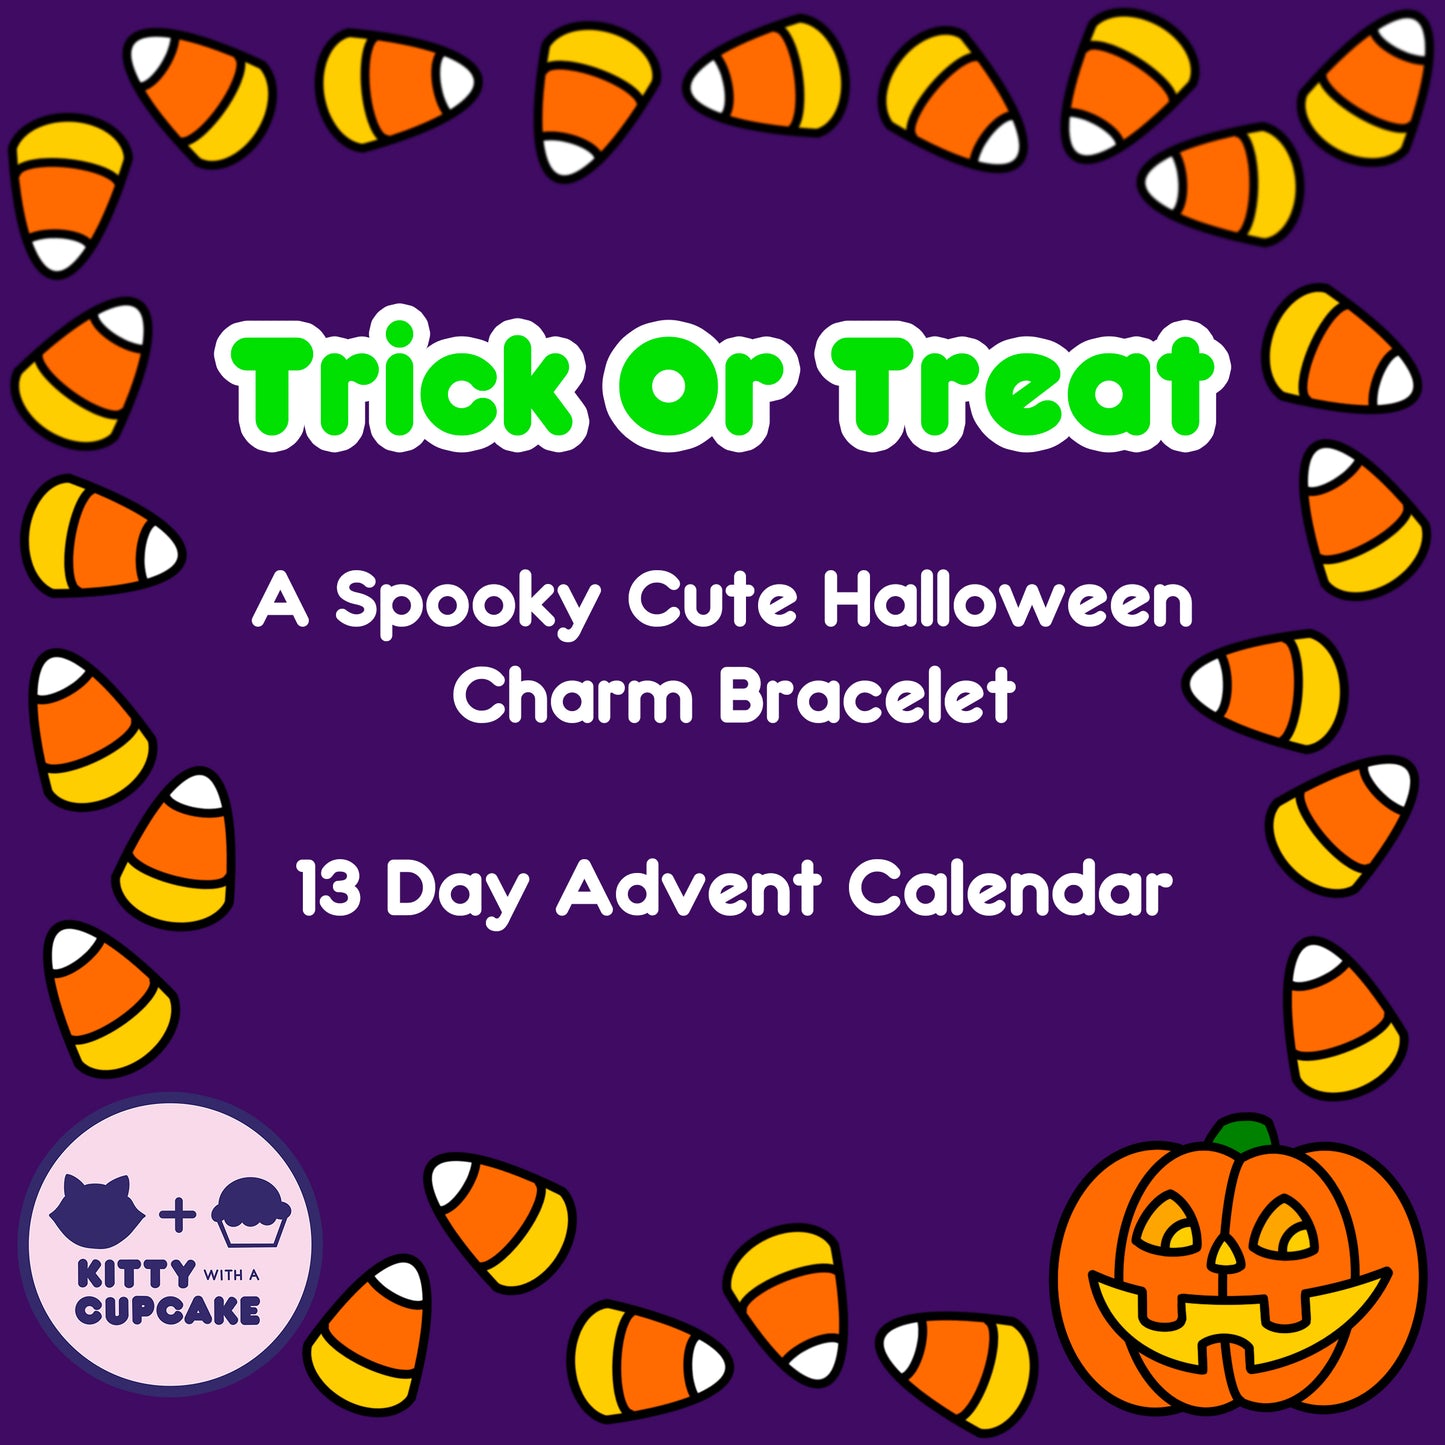 Trick Or Treat - A Spooky Cute Halloween Charm Bracelet, 13 Day Advent Calendar. These words are surrounded by graphics of candy corn and a pumpkin. 